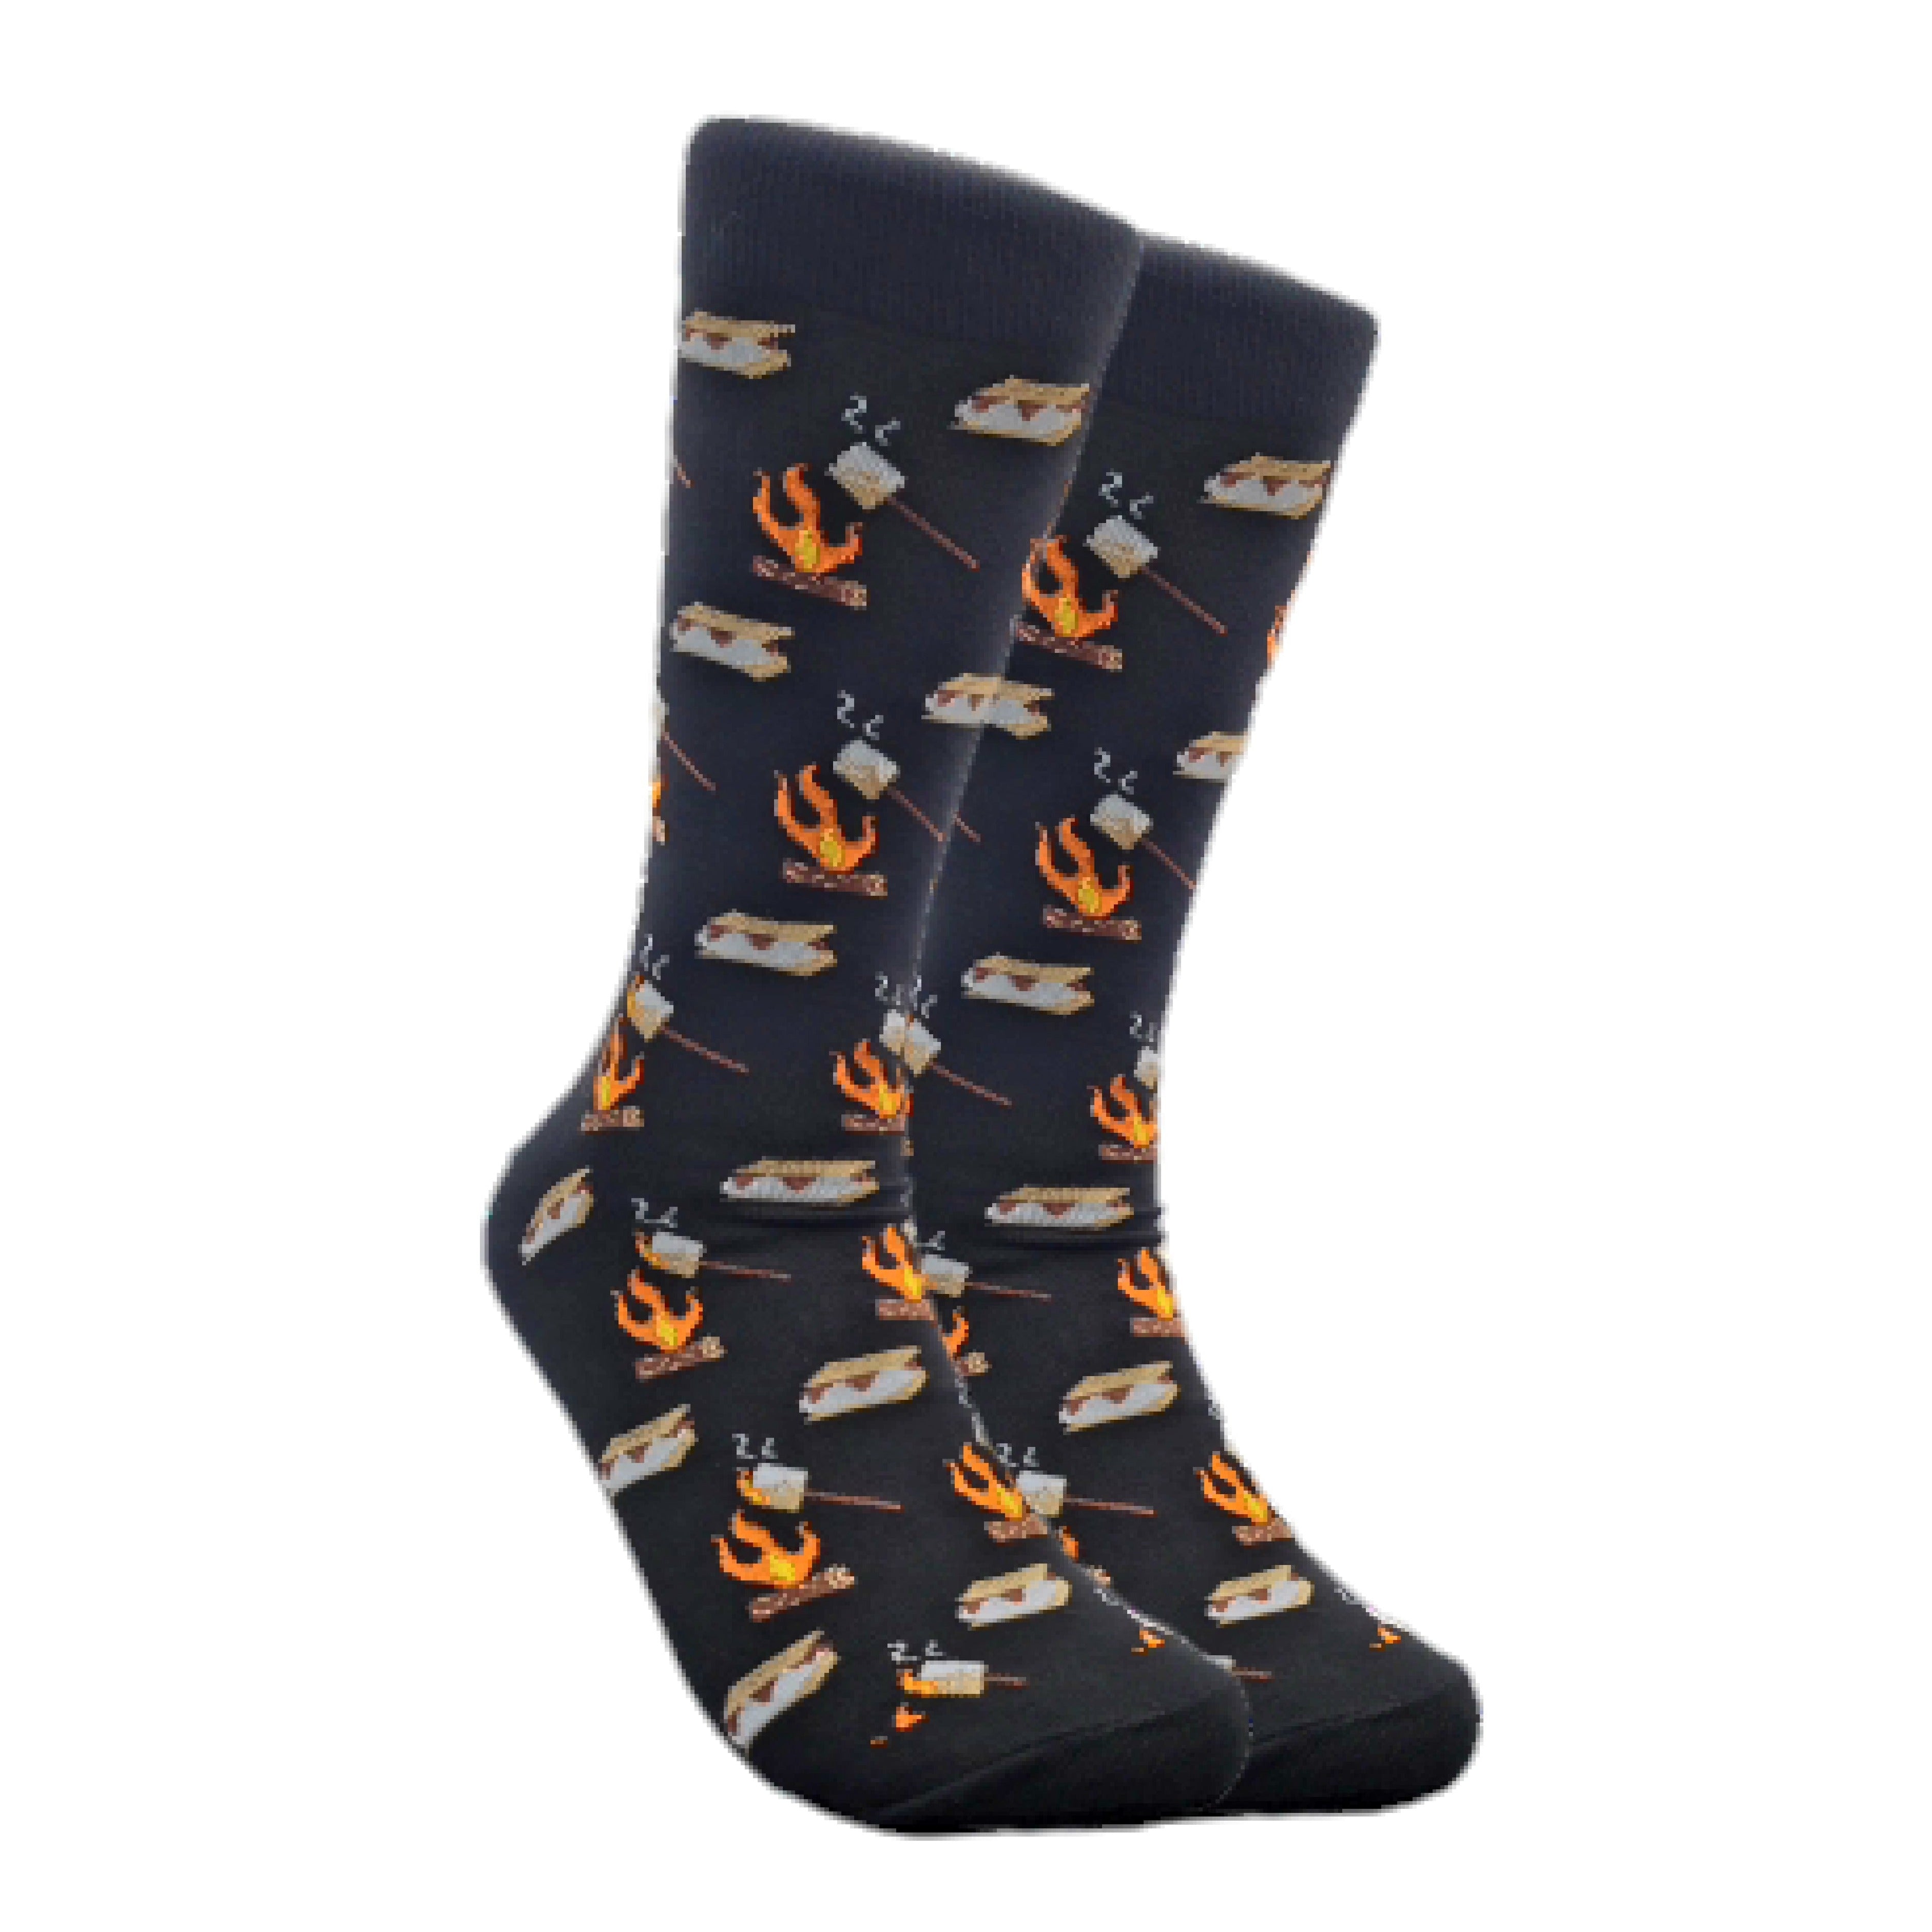 Smores Socks from the Sock Panda (Adult Large)